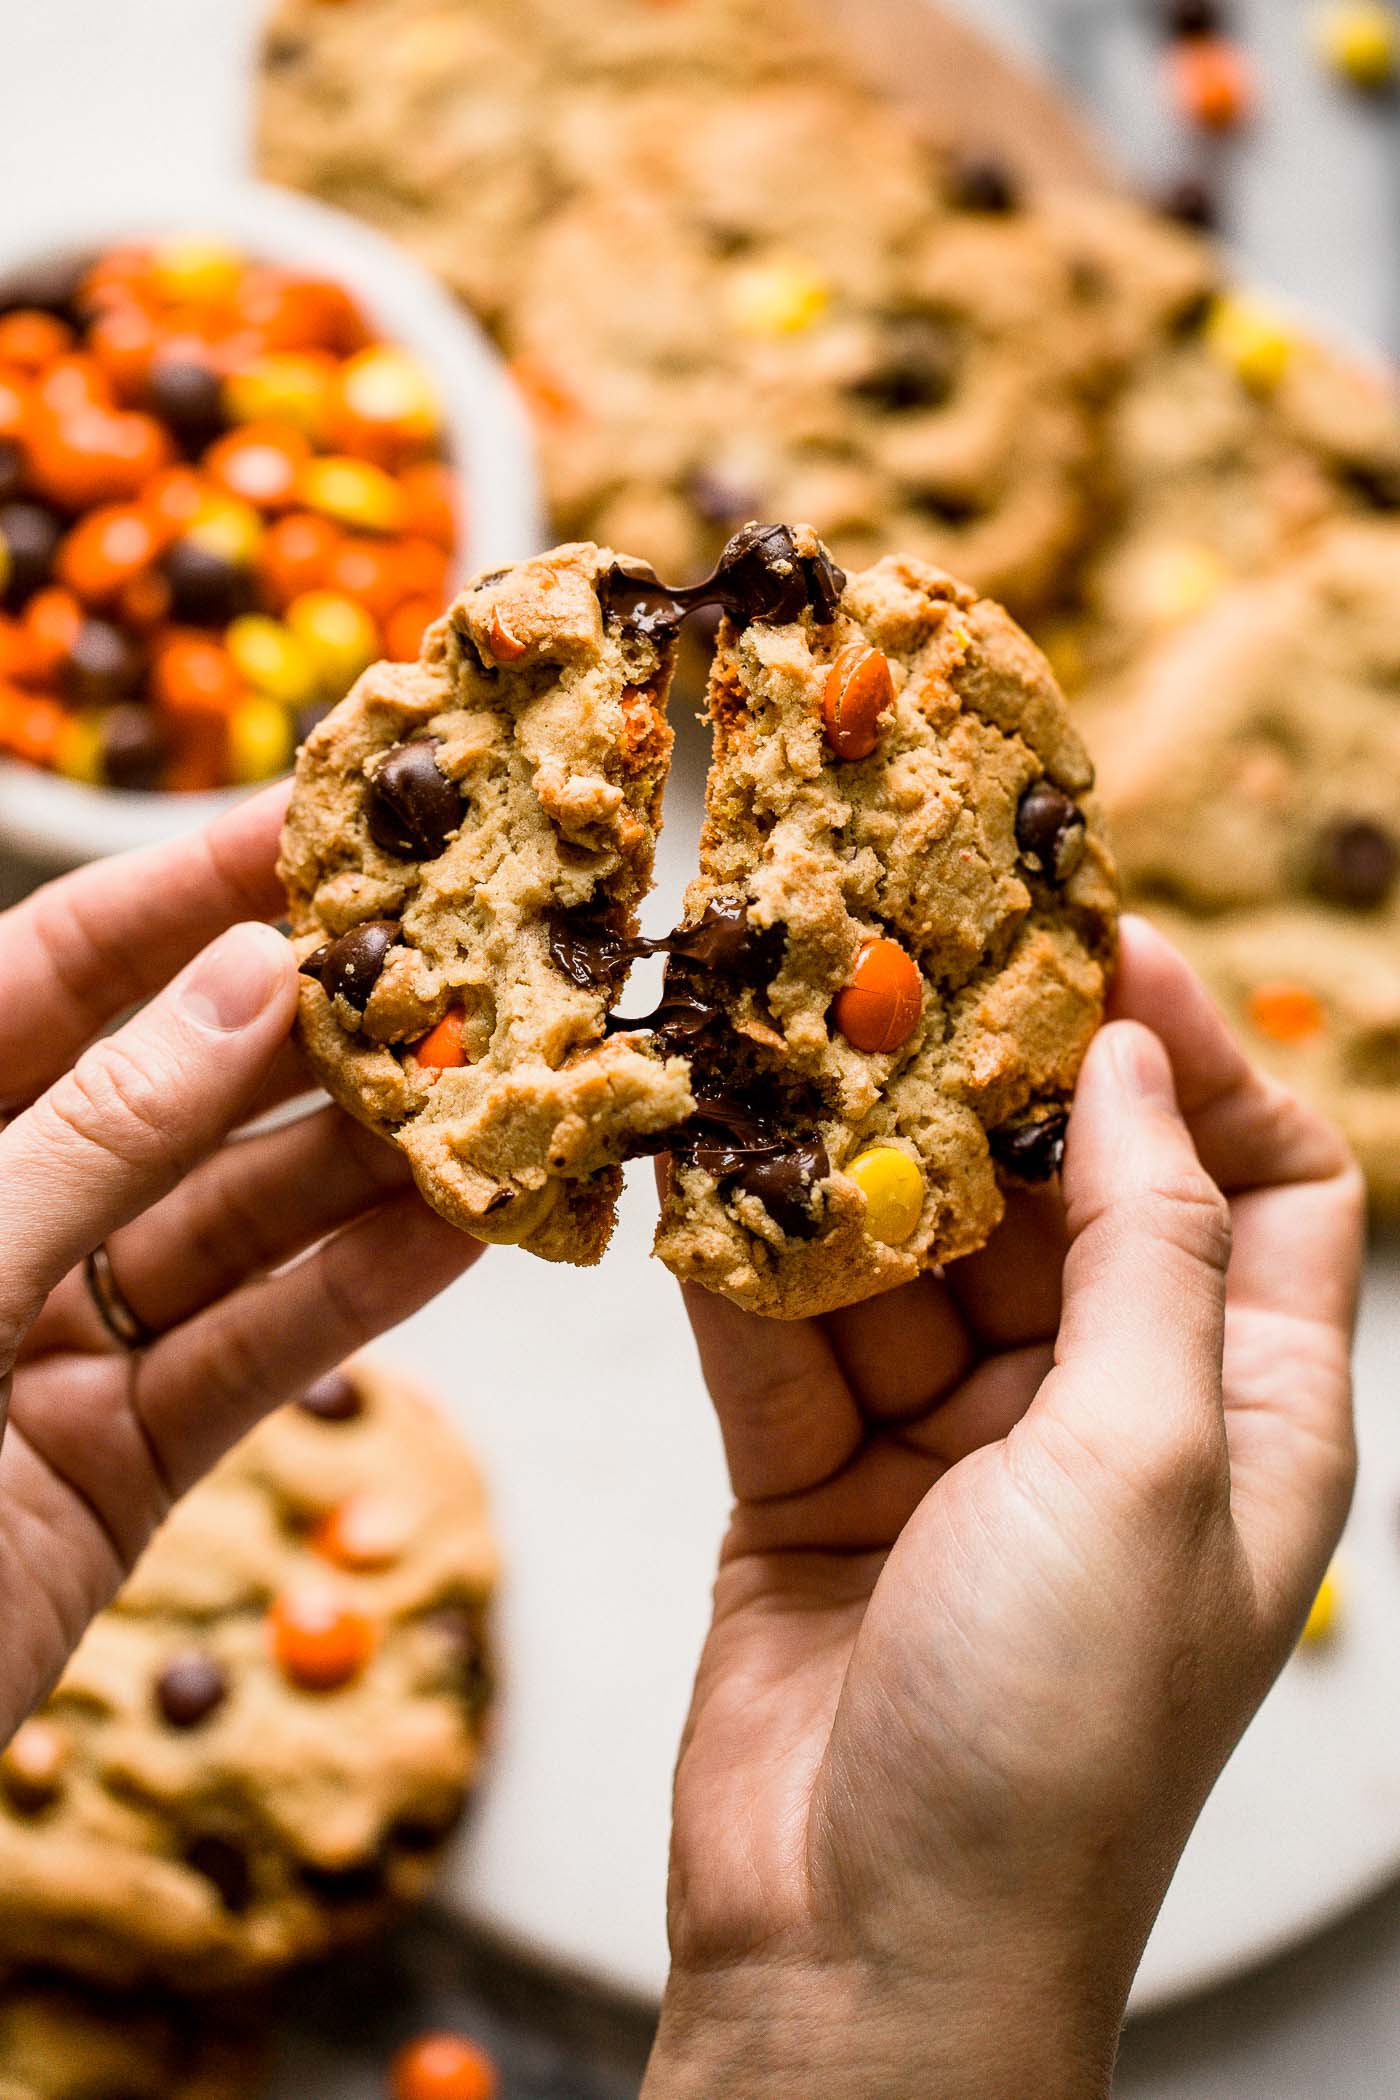 giant peanut butter chocolate chip cookie broken in half with Reese's Pieces and more cookies in the background